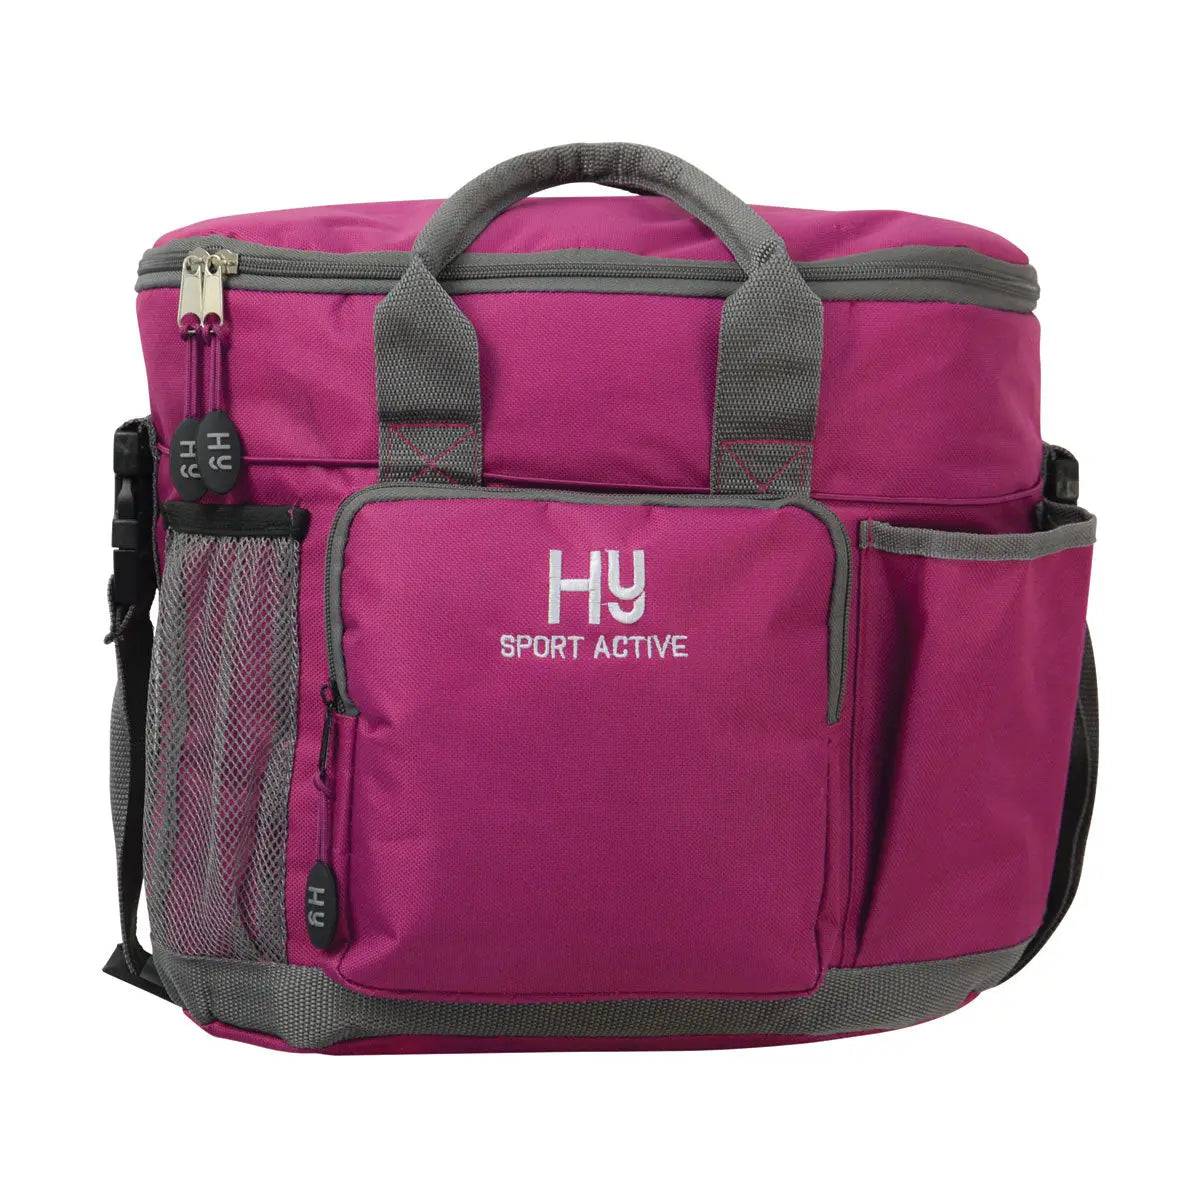 Hy Sport Active Grooming Bag Port Royal HY Equestrian Grooming Bags, Boxes & Kits Barnstaple Equestrian Supplies